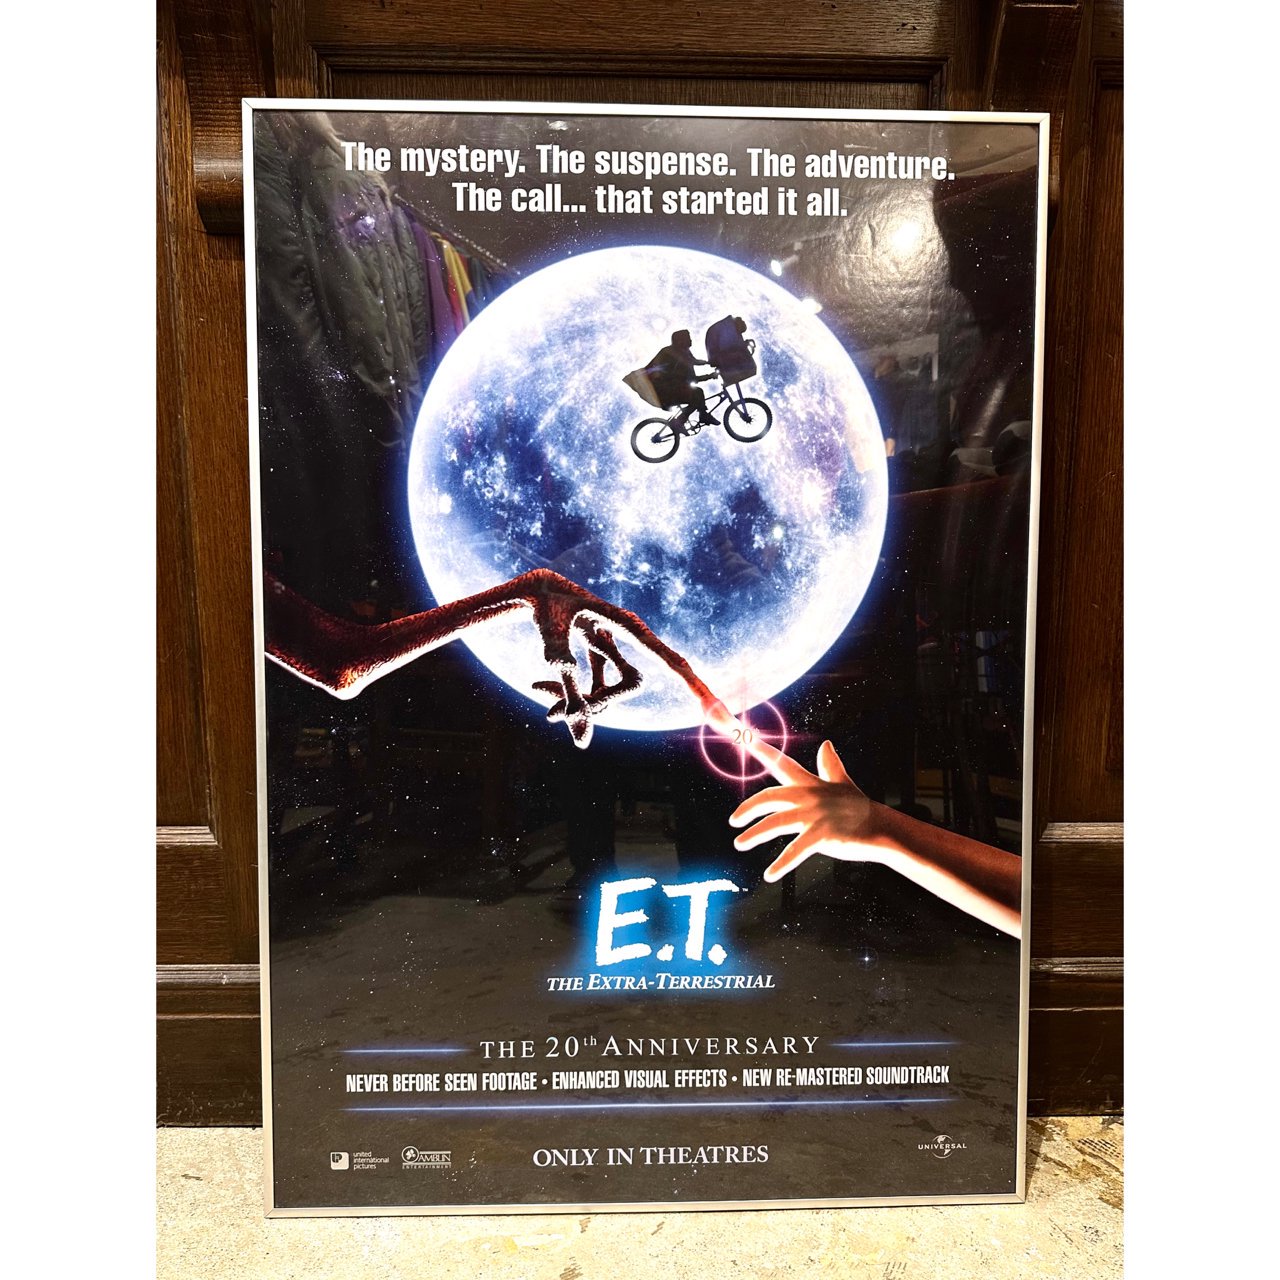 2002 E.T. Poster A1 size Design by pyramid PRINTED IN ENGLAND